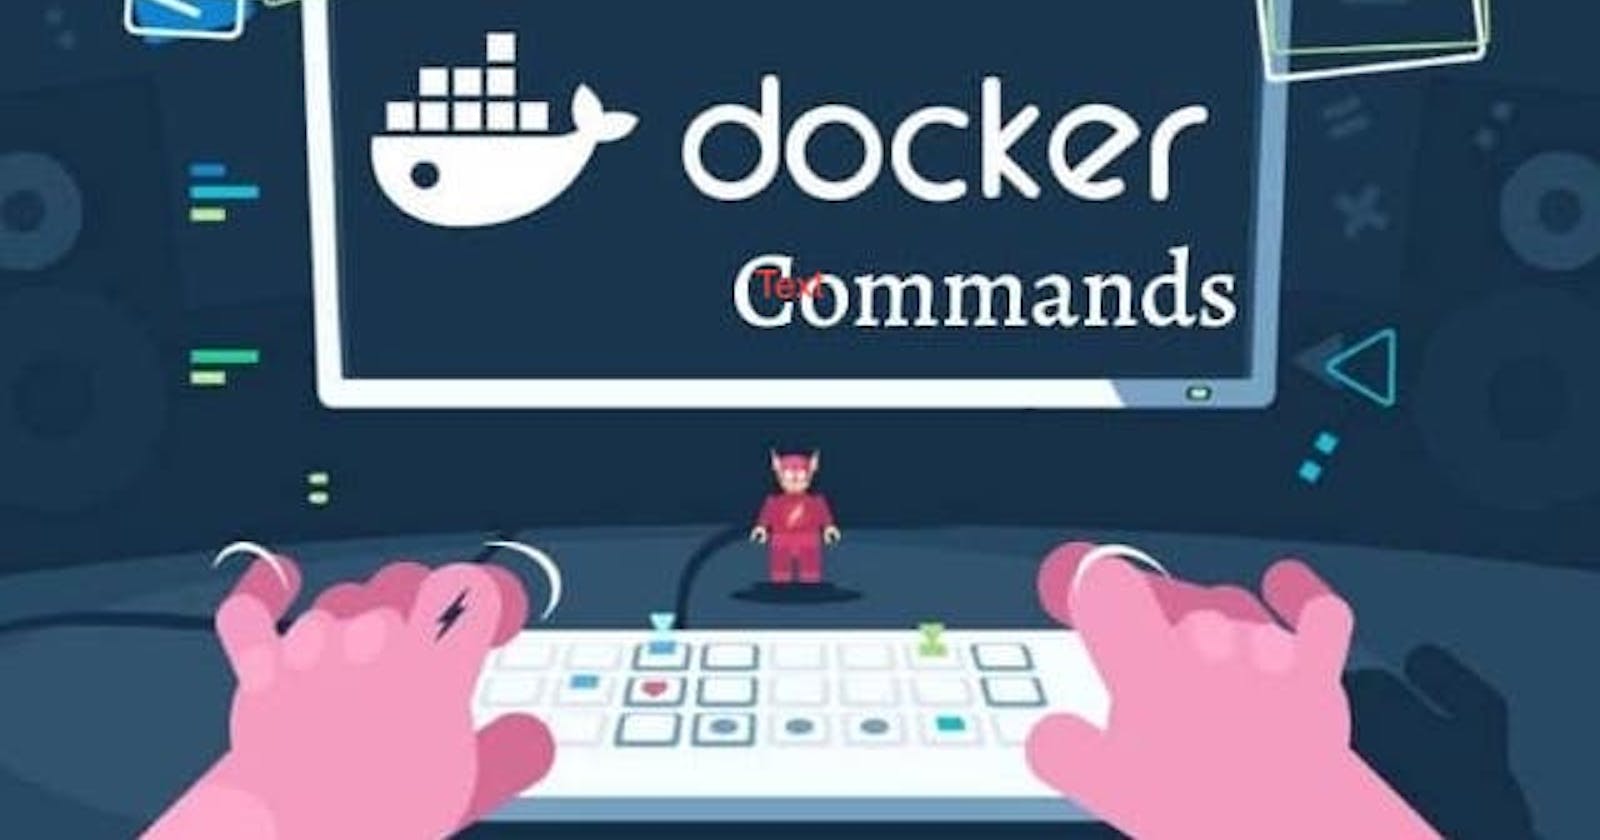 Essential Docker Commands for Containerization